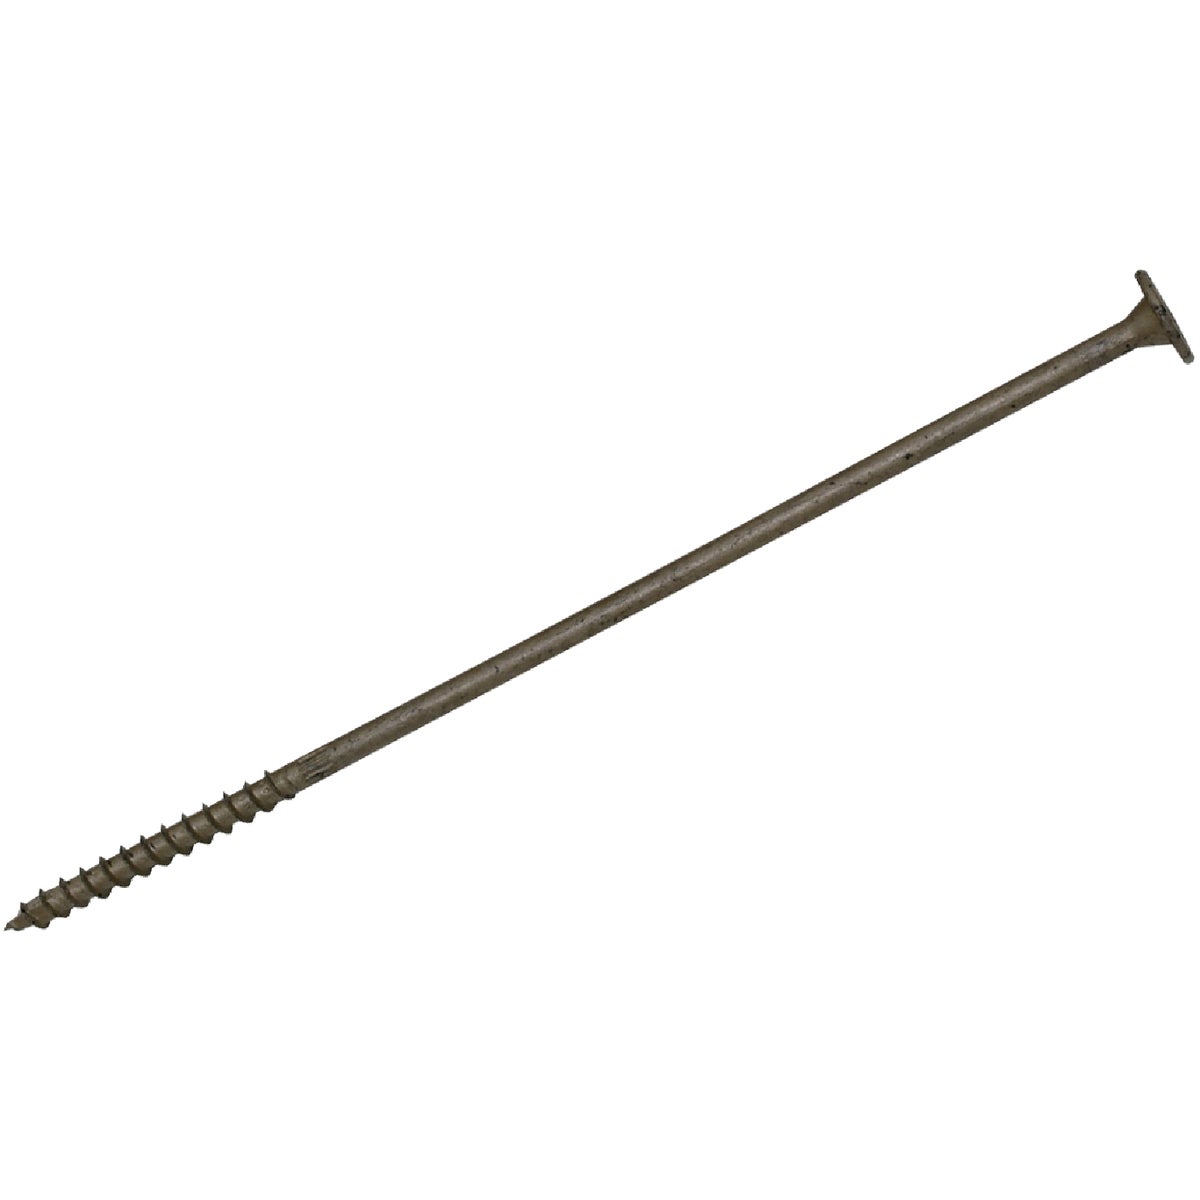 Item 240340, These screws are designed to be an easy-to-install, high-strength 